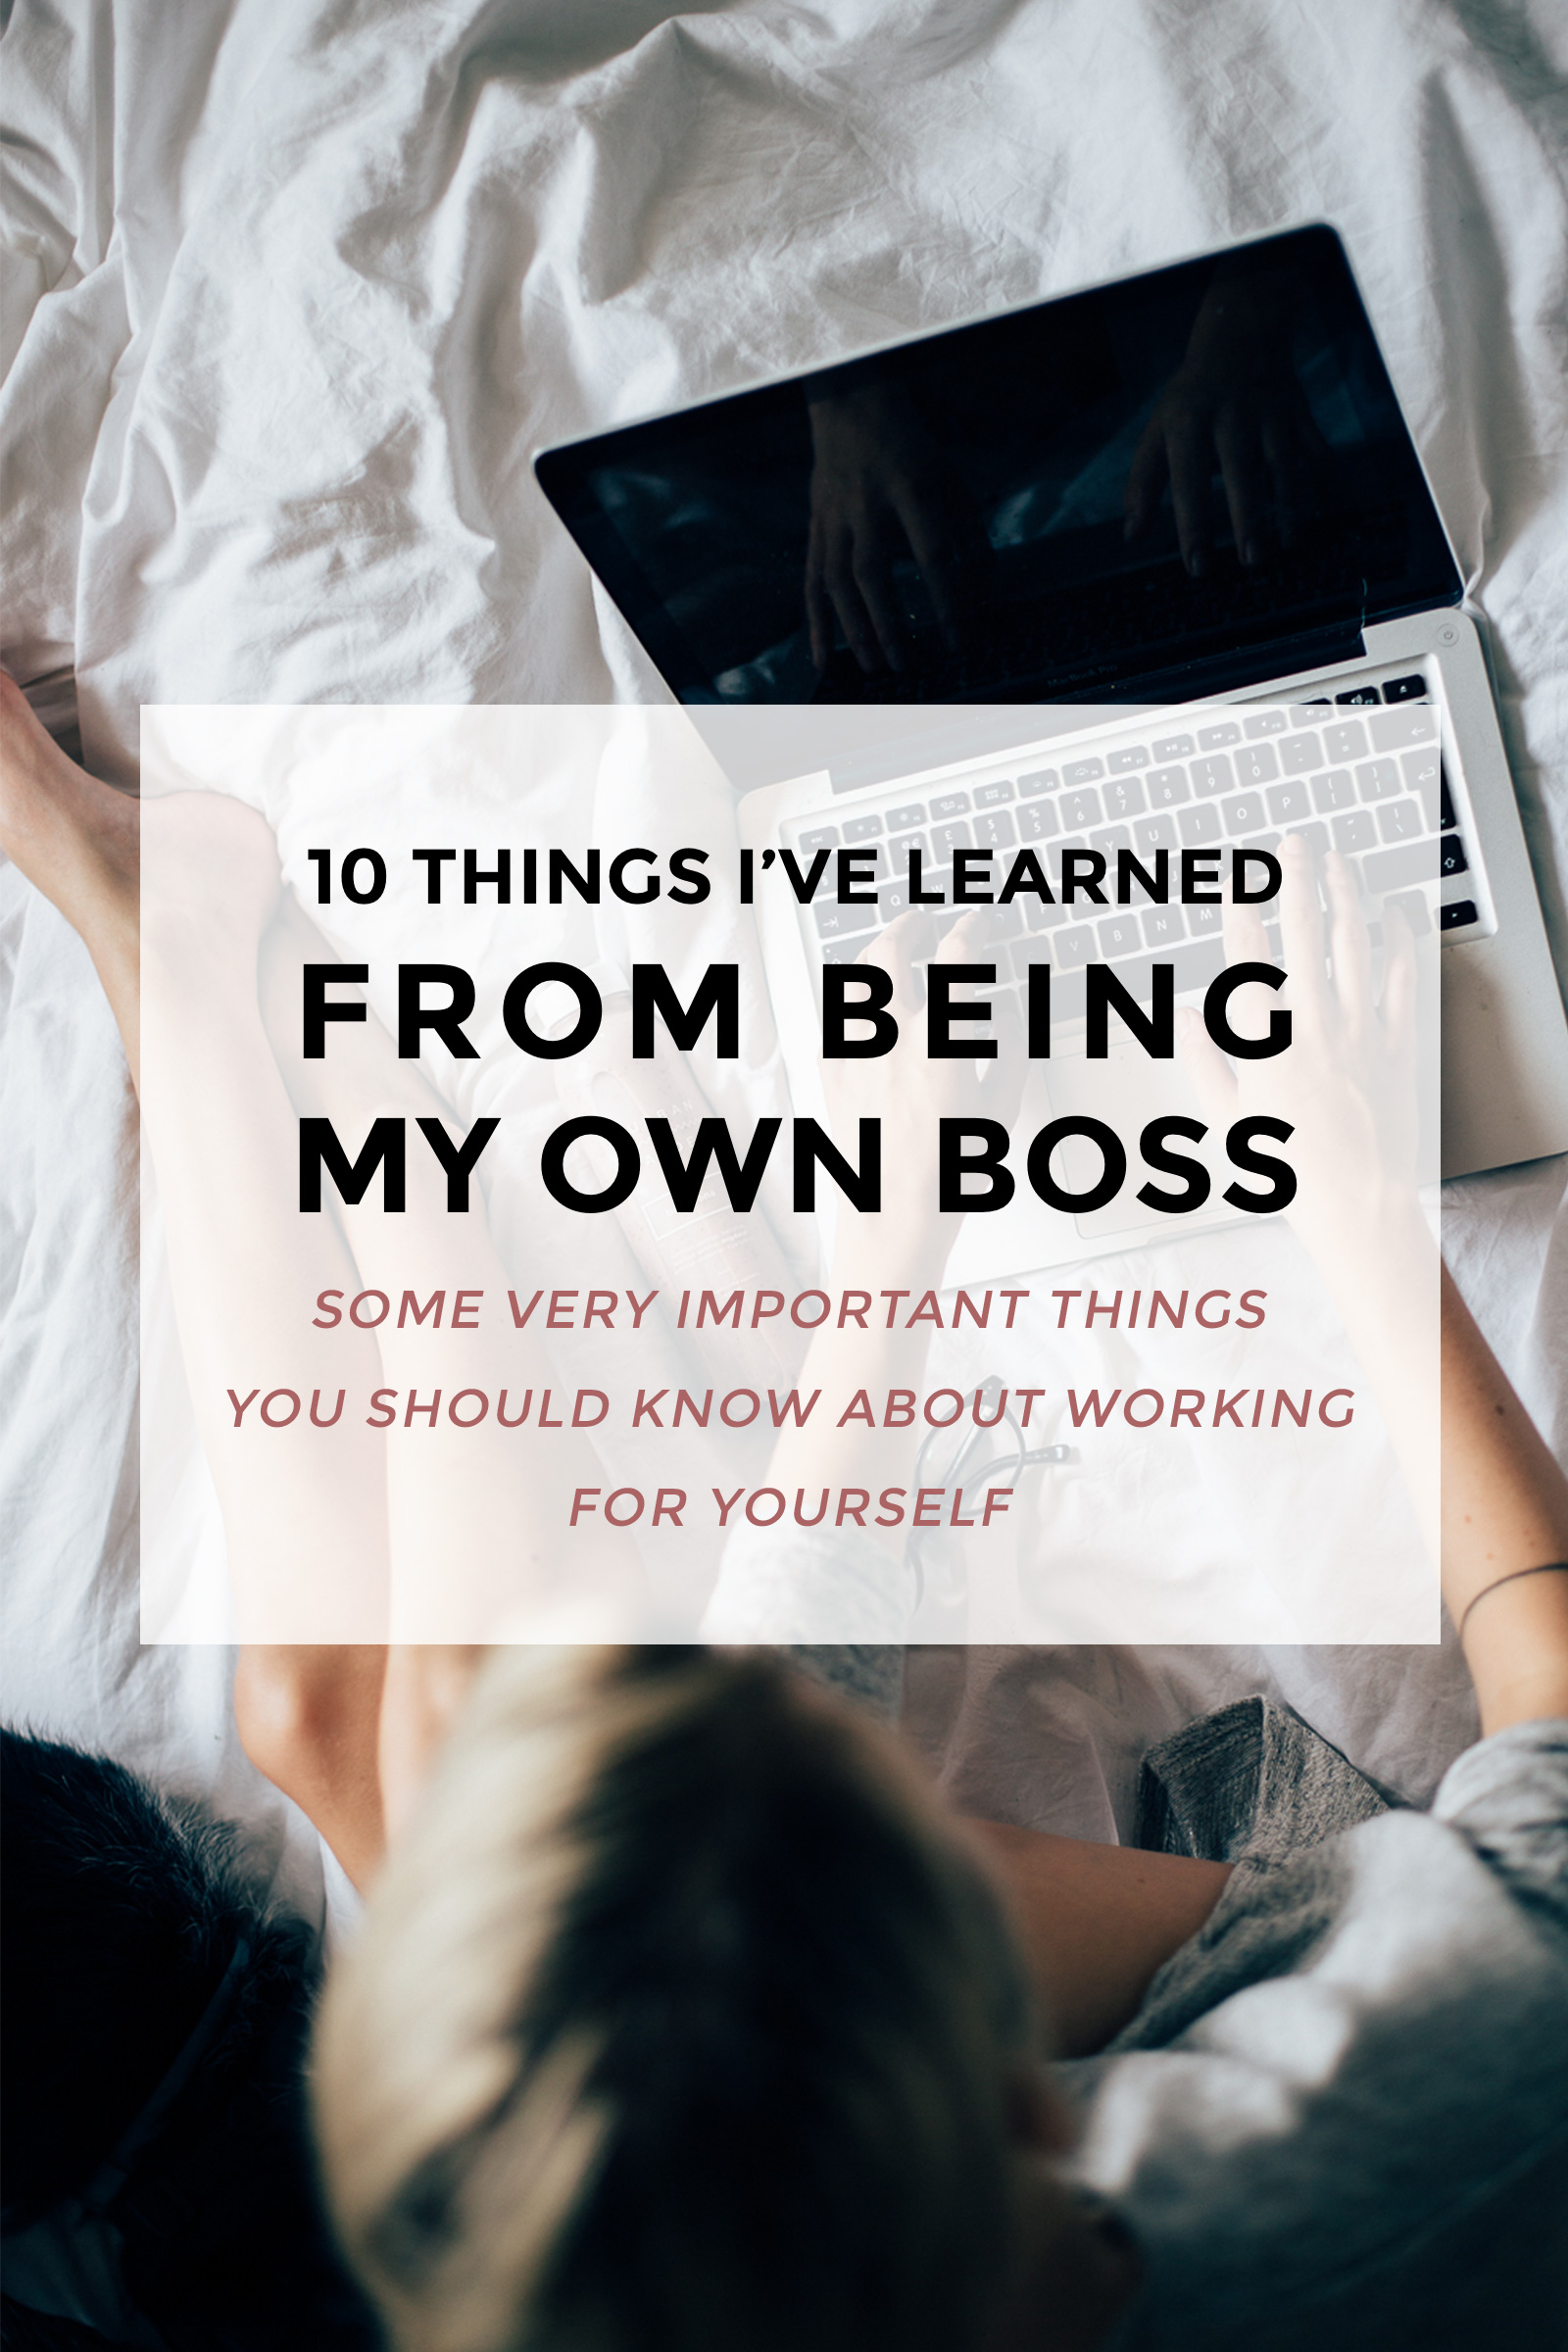 I absolutely love being a creative business owner. I feel grateful every day that my work allows me to have all the freedom I need & keeps me motivated to grow. I've been freelancing for over four years now & today I'd like to share some of the things I've learned so far from being my own boss. (business tips, blogging tips, blogging for money, entrepreneur blogging tips, being your own boss, tips for bloggers)